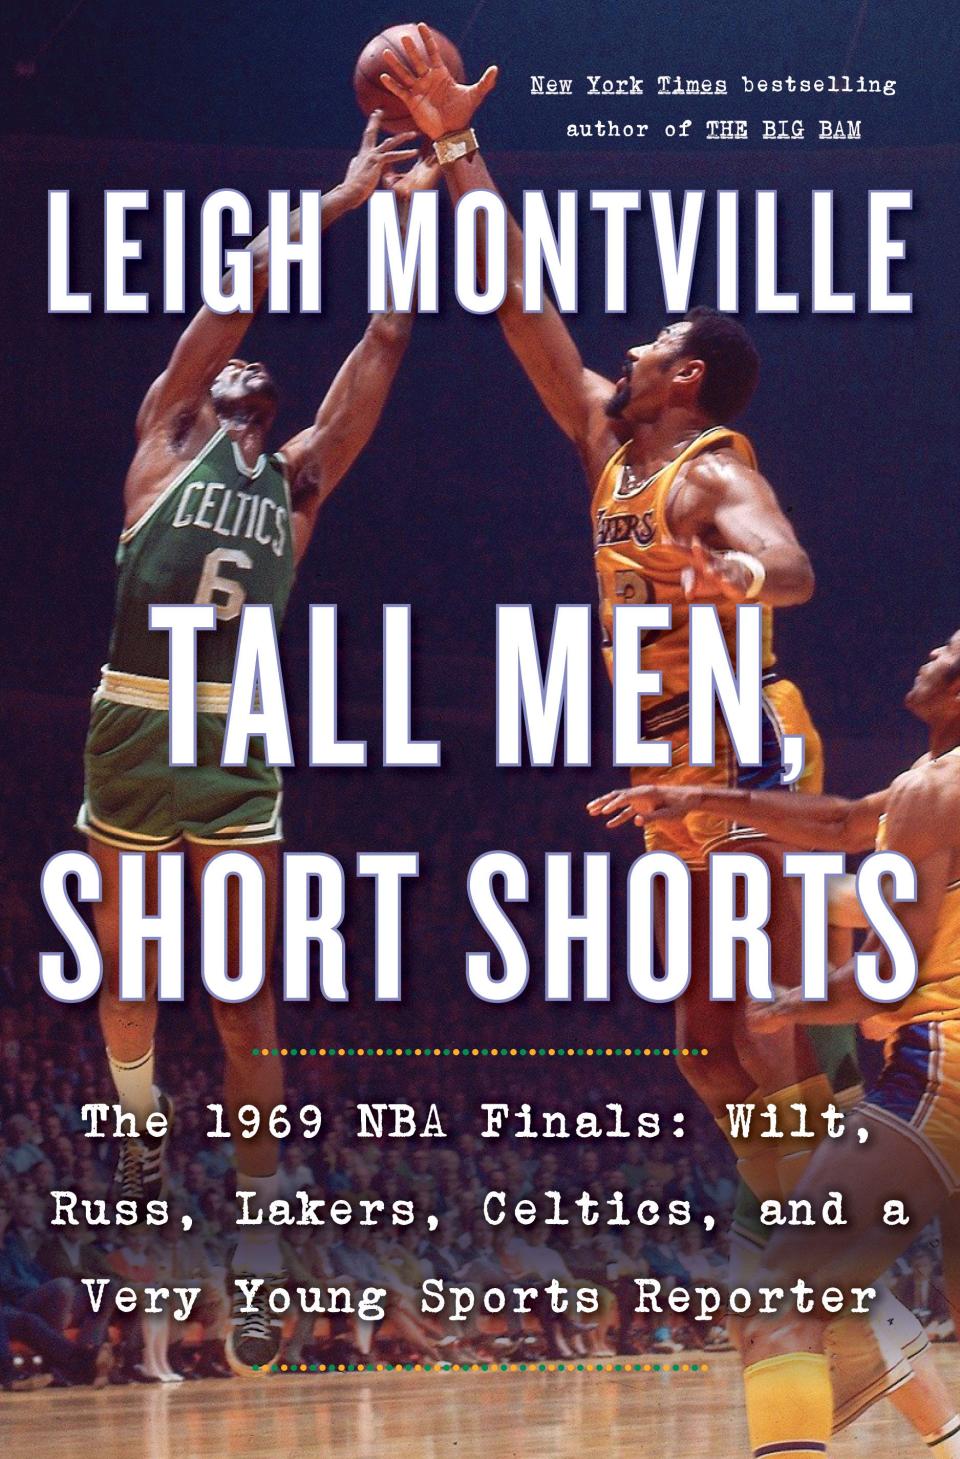 "Tall Men, Short Shorts,' is a writer’s look back at his time as a cub reporter covering the Celtics — specifically, covering the 1969 NBA Finals as a 25-year-old rookie sports reporter for the Boston Globe.